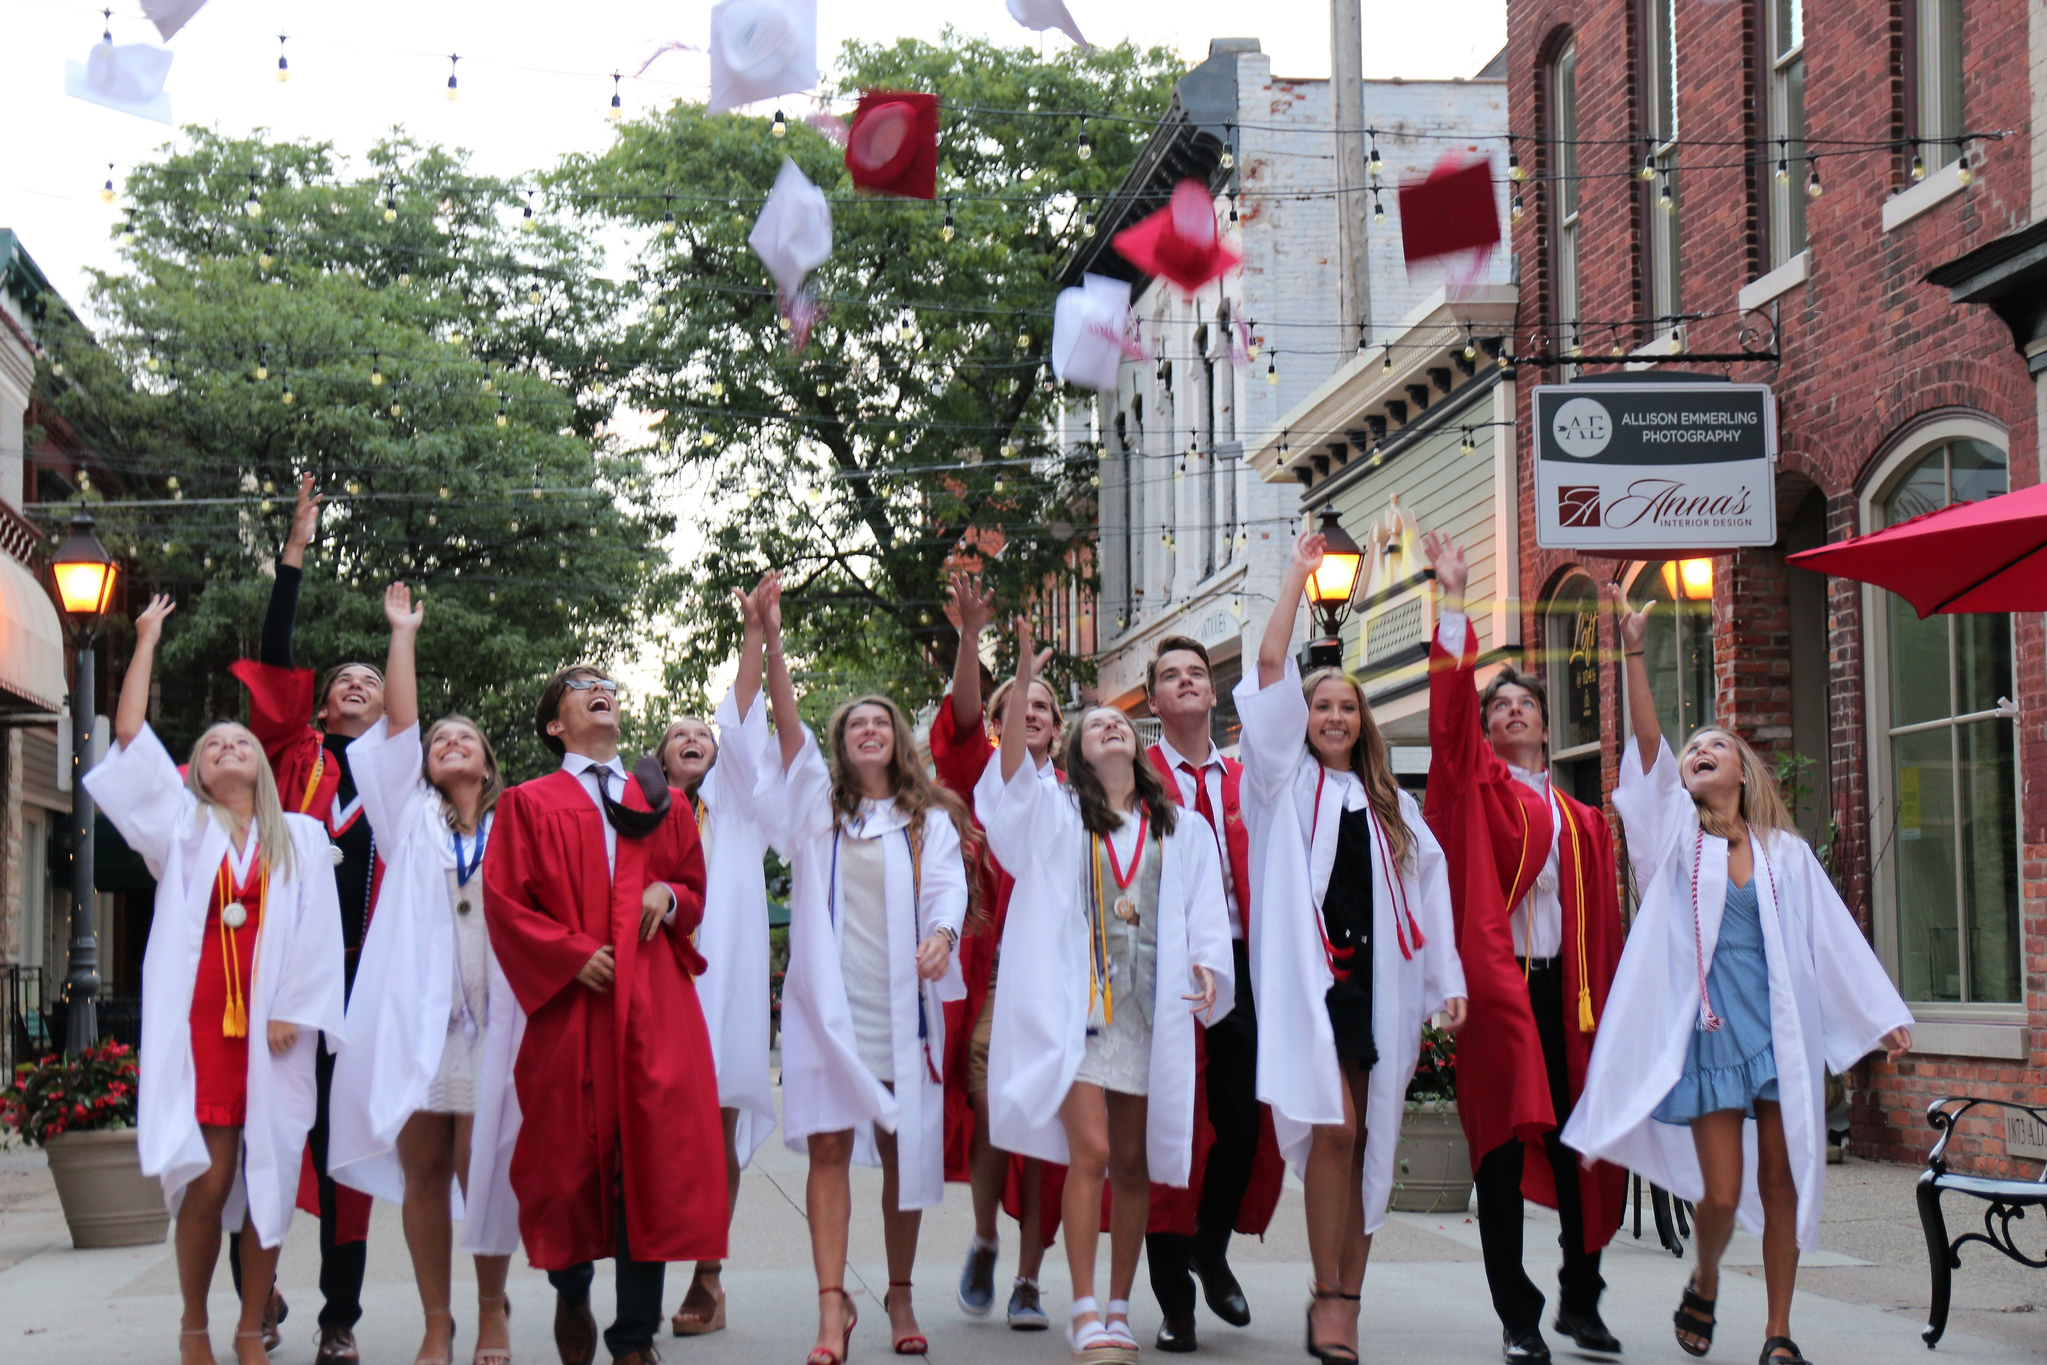 A group of students walking and throwing their graduation caps in the air